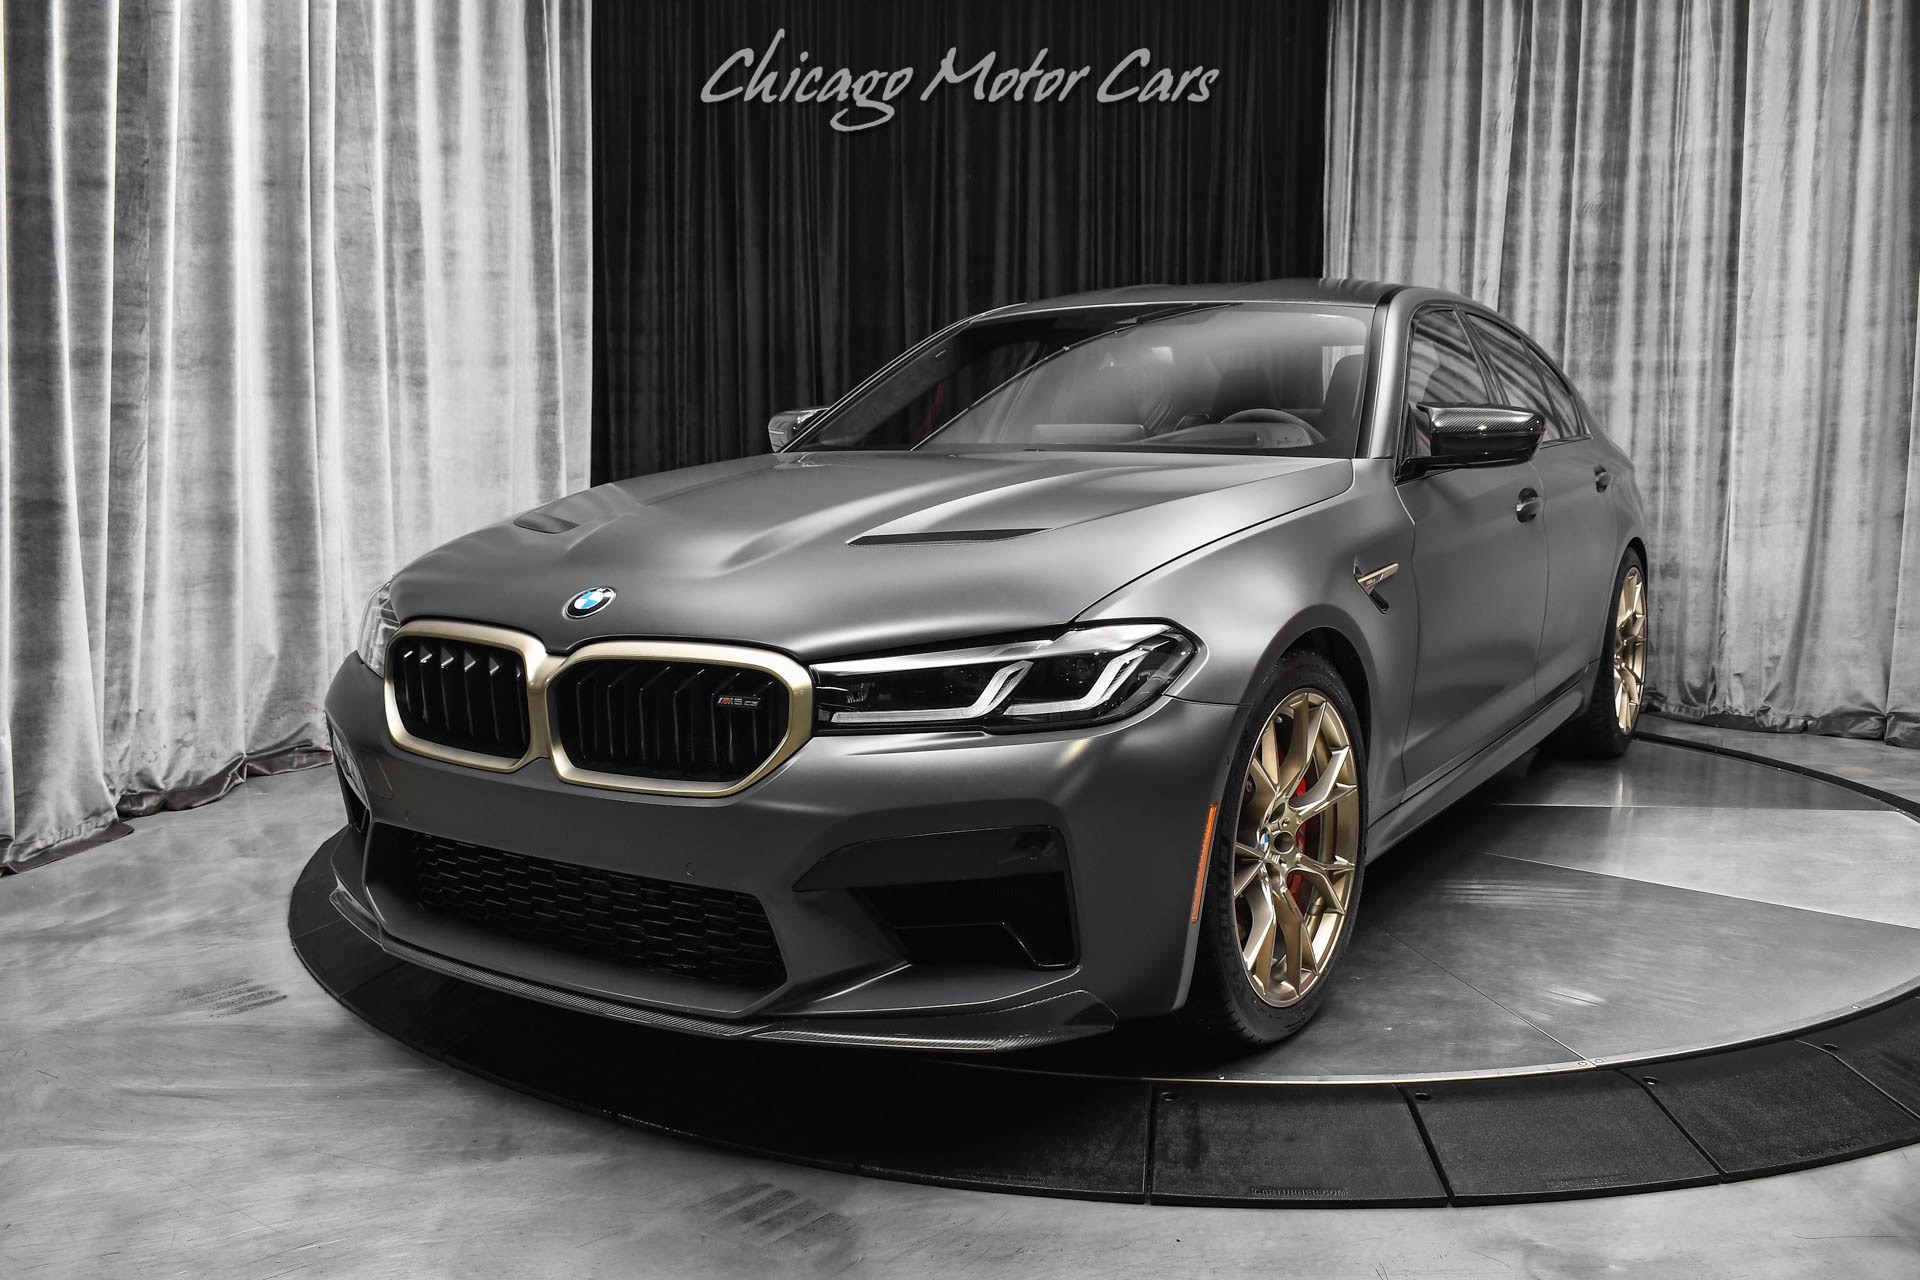 Used-2022-BMW-M5-CS-1-of-350-Made-Only-7700-Miles-LOADED148k-MSRP-RARE-Frozen-Grey